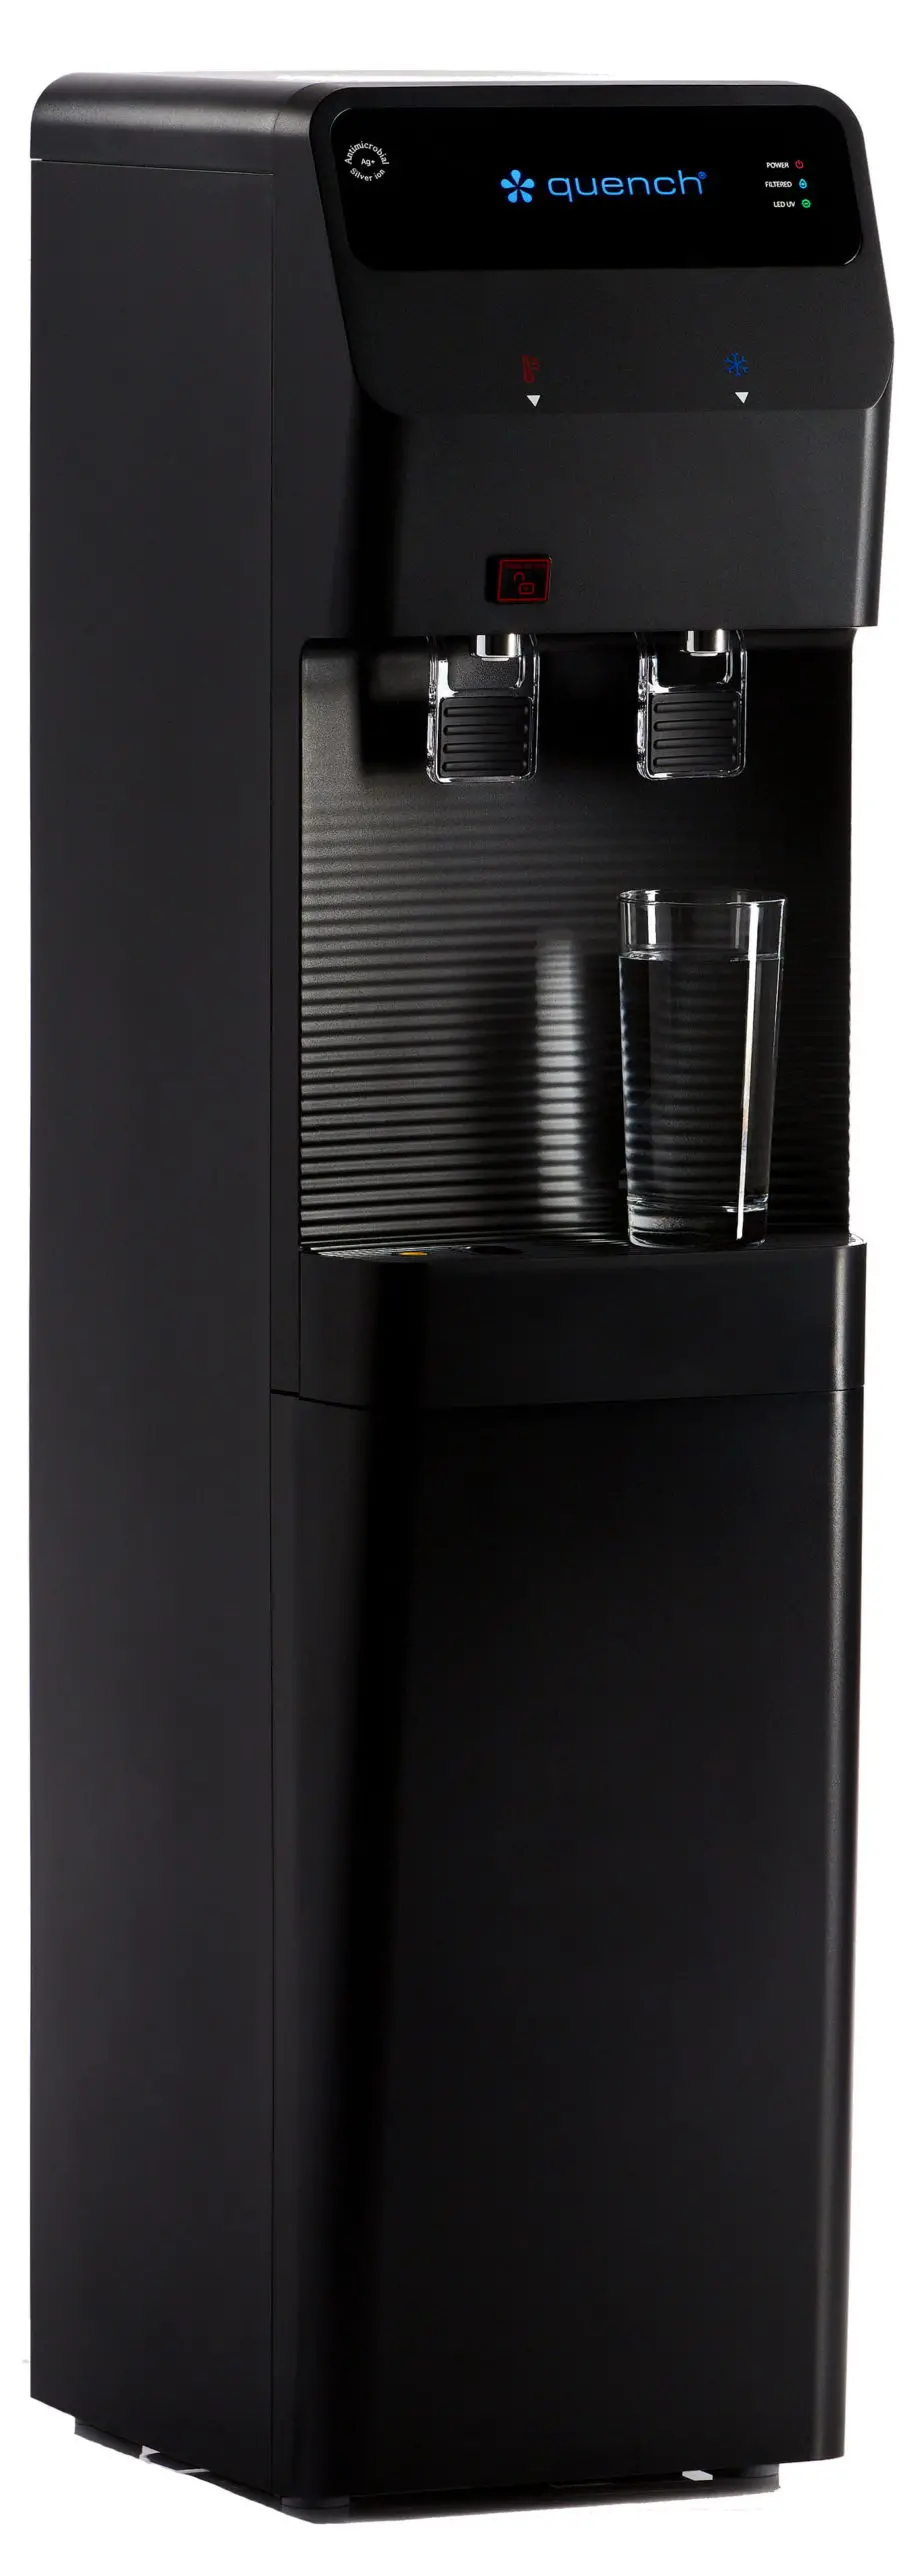 Quench Q3 Filtered Water Cooler